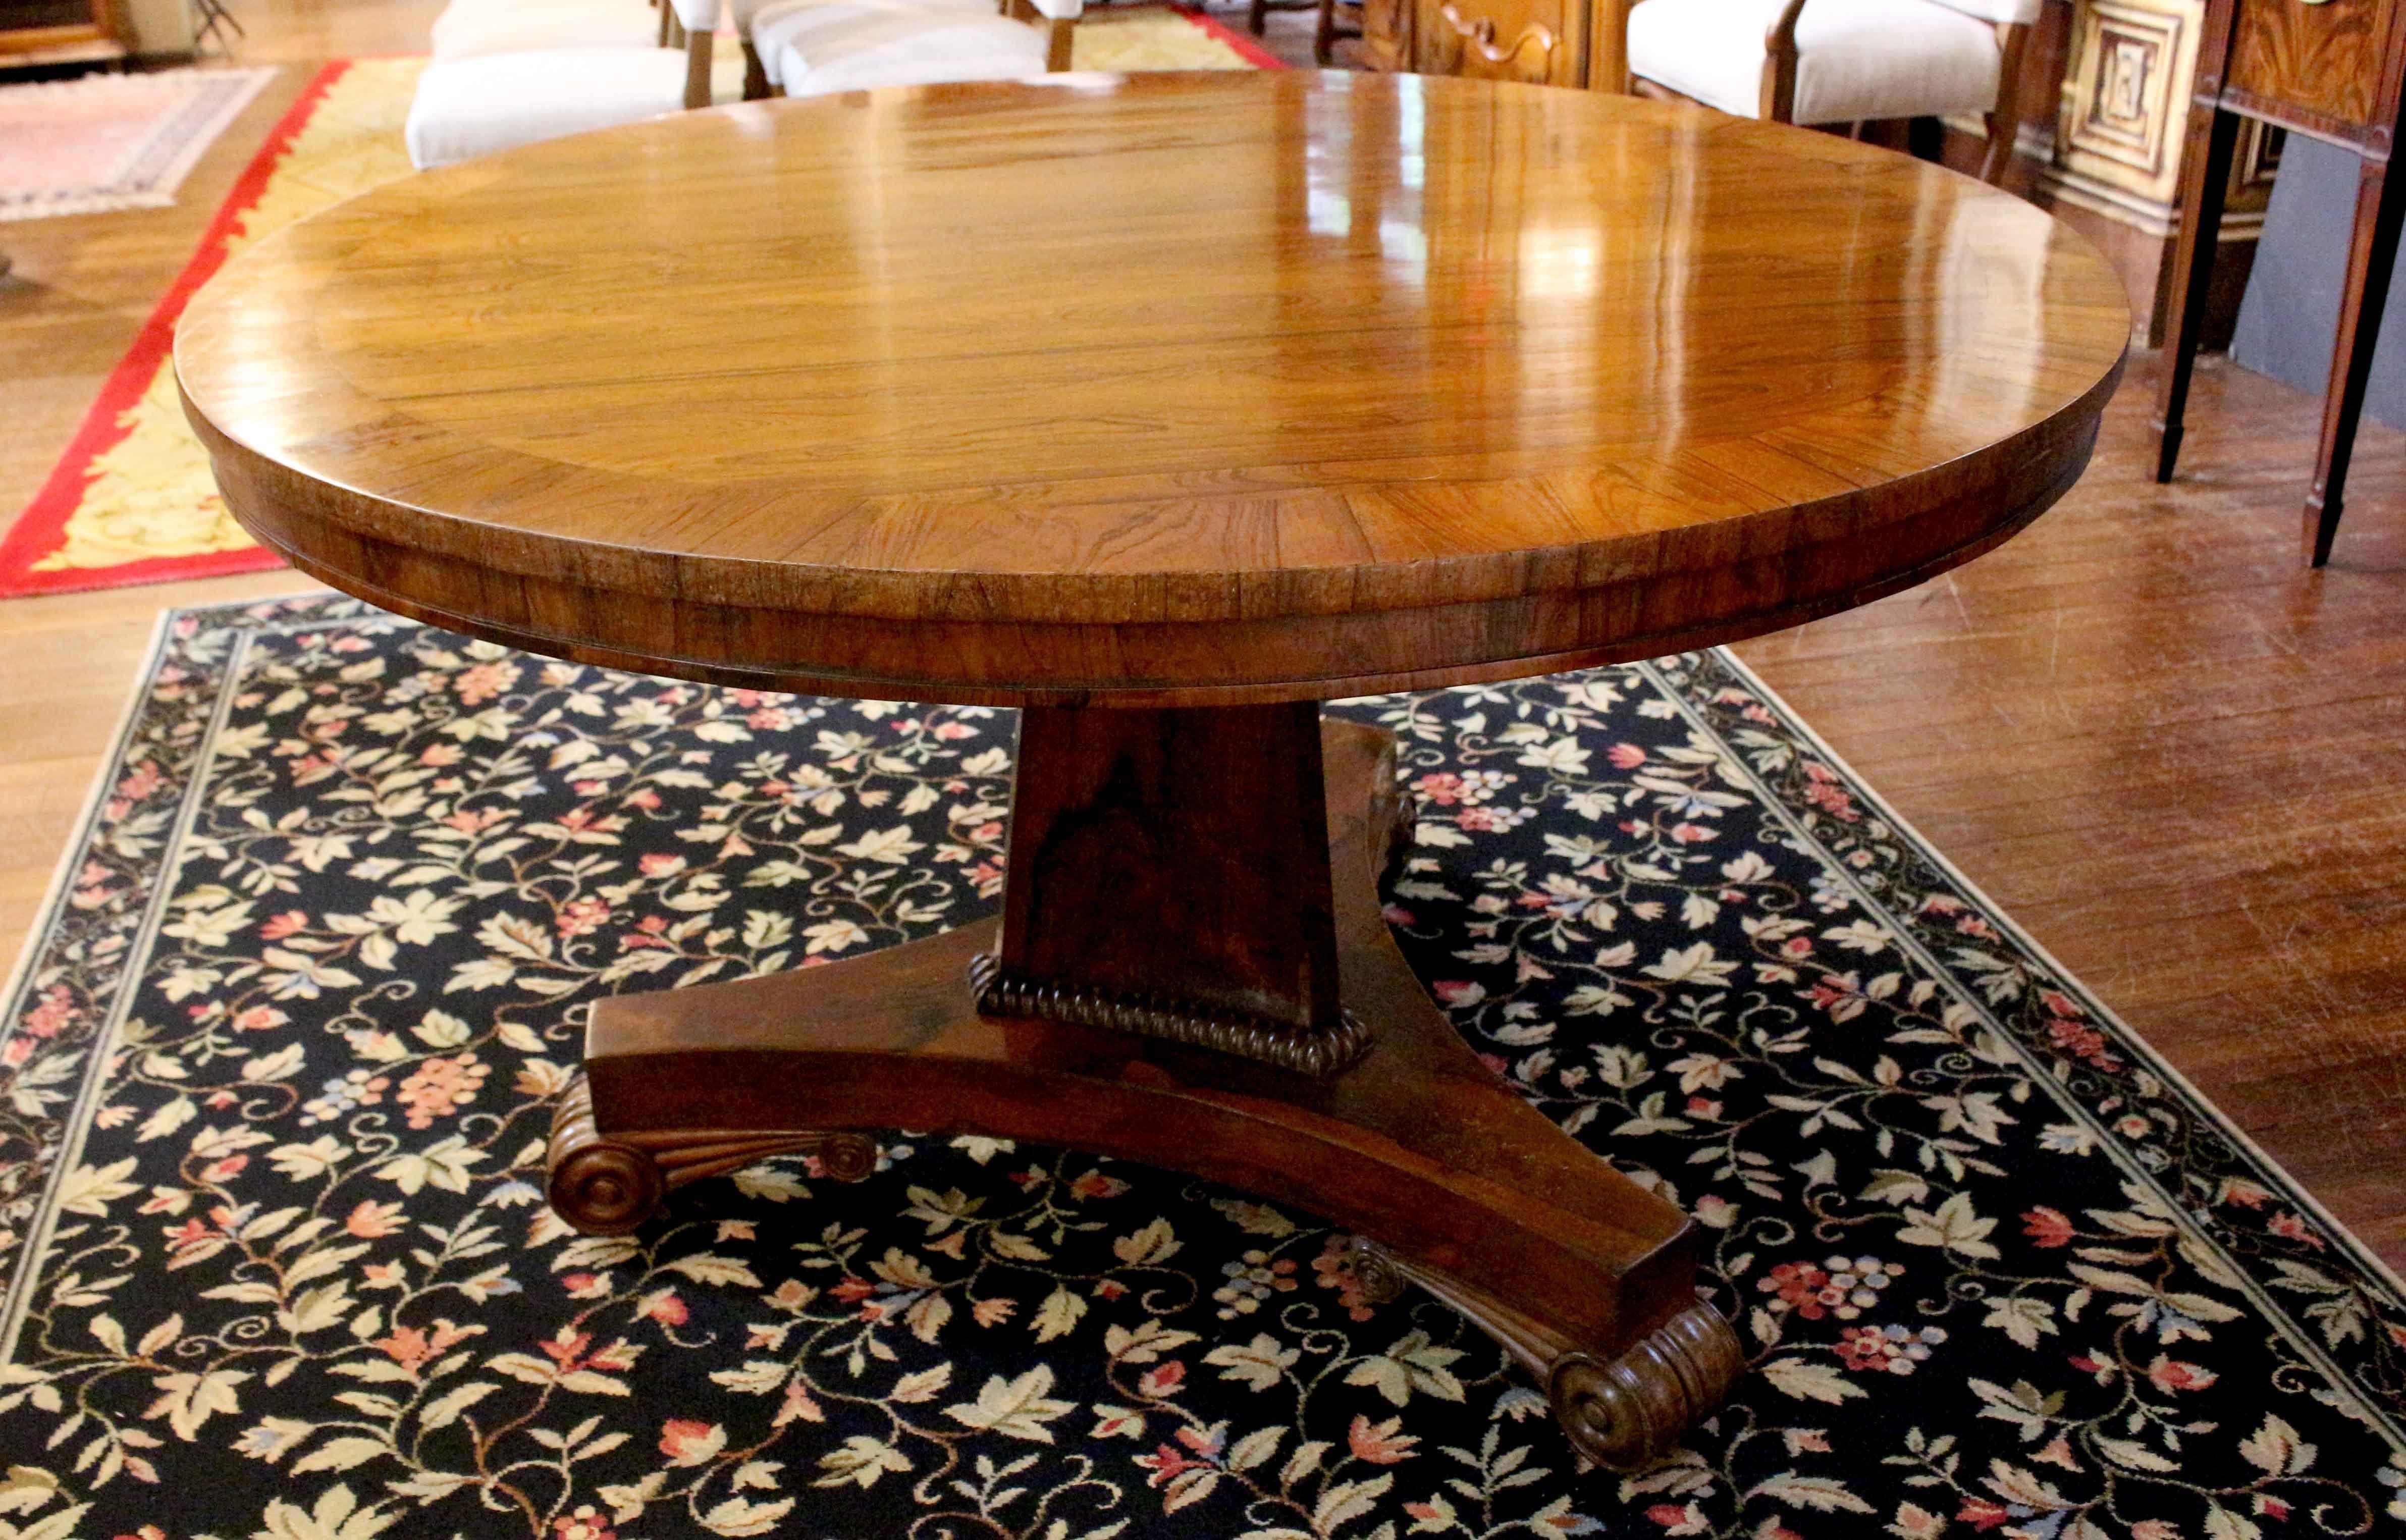 Regency period, early 19th century, center table, English. Rosewood with rosewood crossbanding. Raised on a faceted triangular pedestal with gadrooning and tripod base with pronounced scrolled, reeded & rosette carved feet on casters. Minor veneer